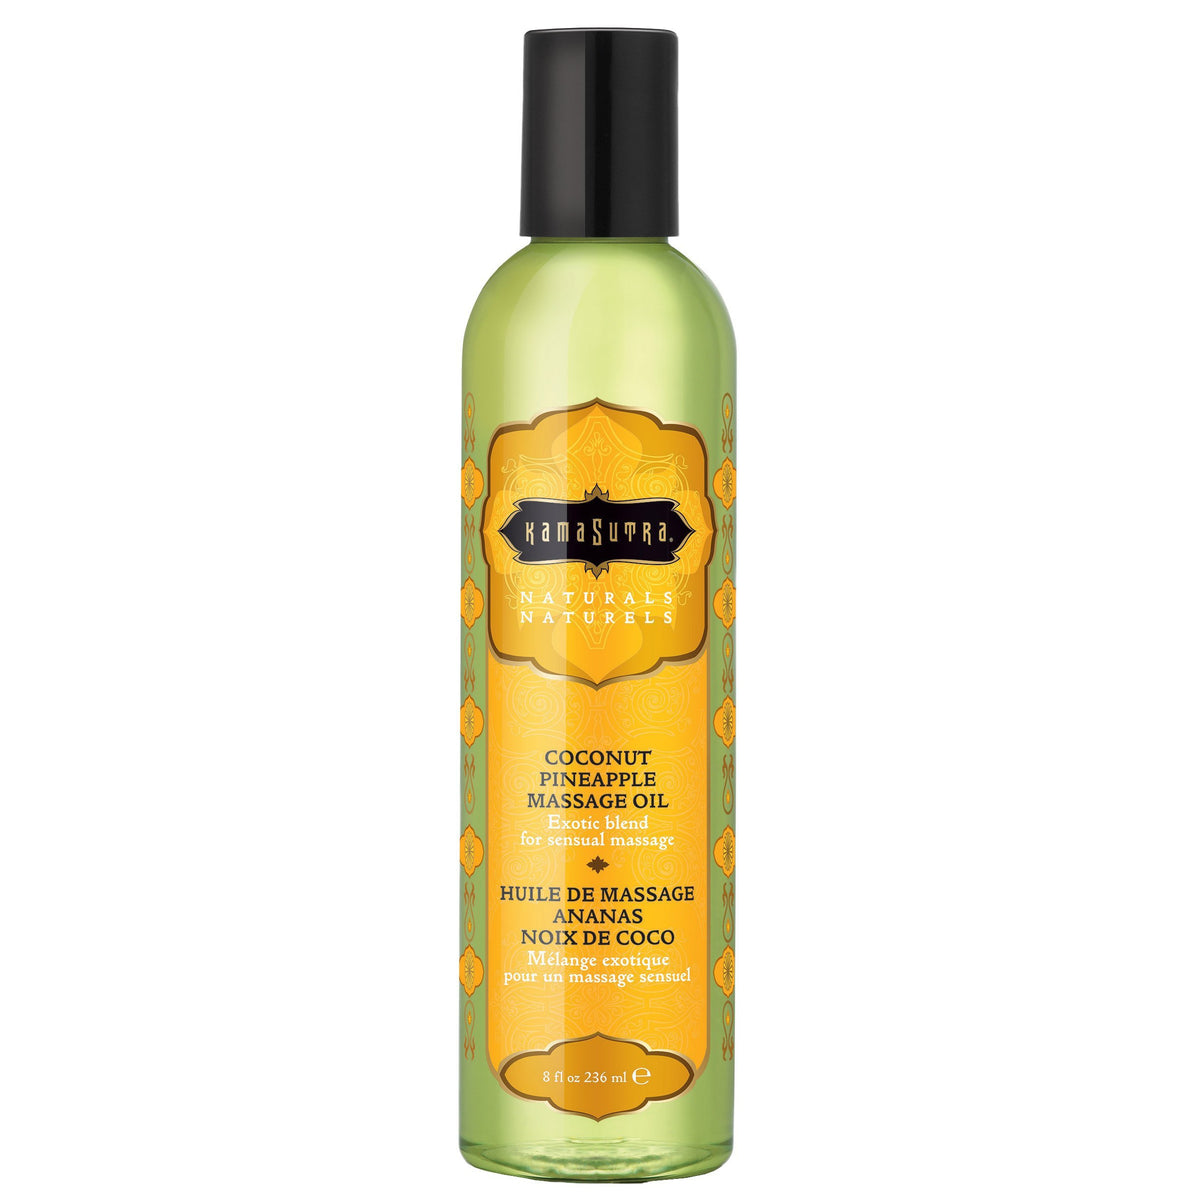 Kama Sutra Naturals Massage Oil - Coconut and Pineapple